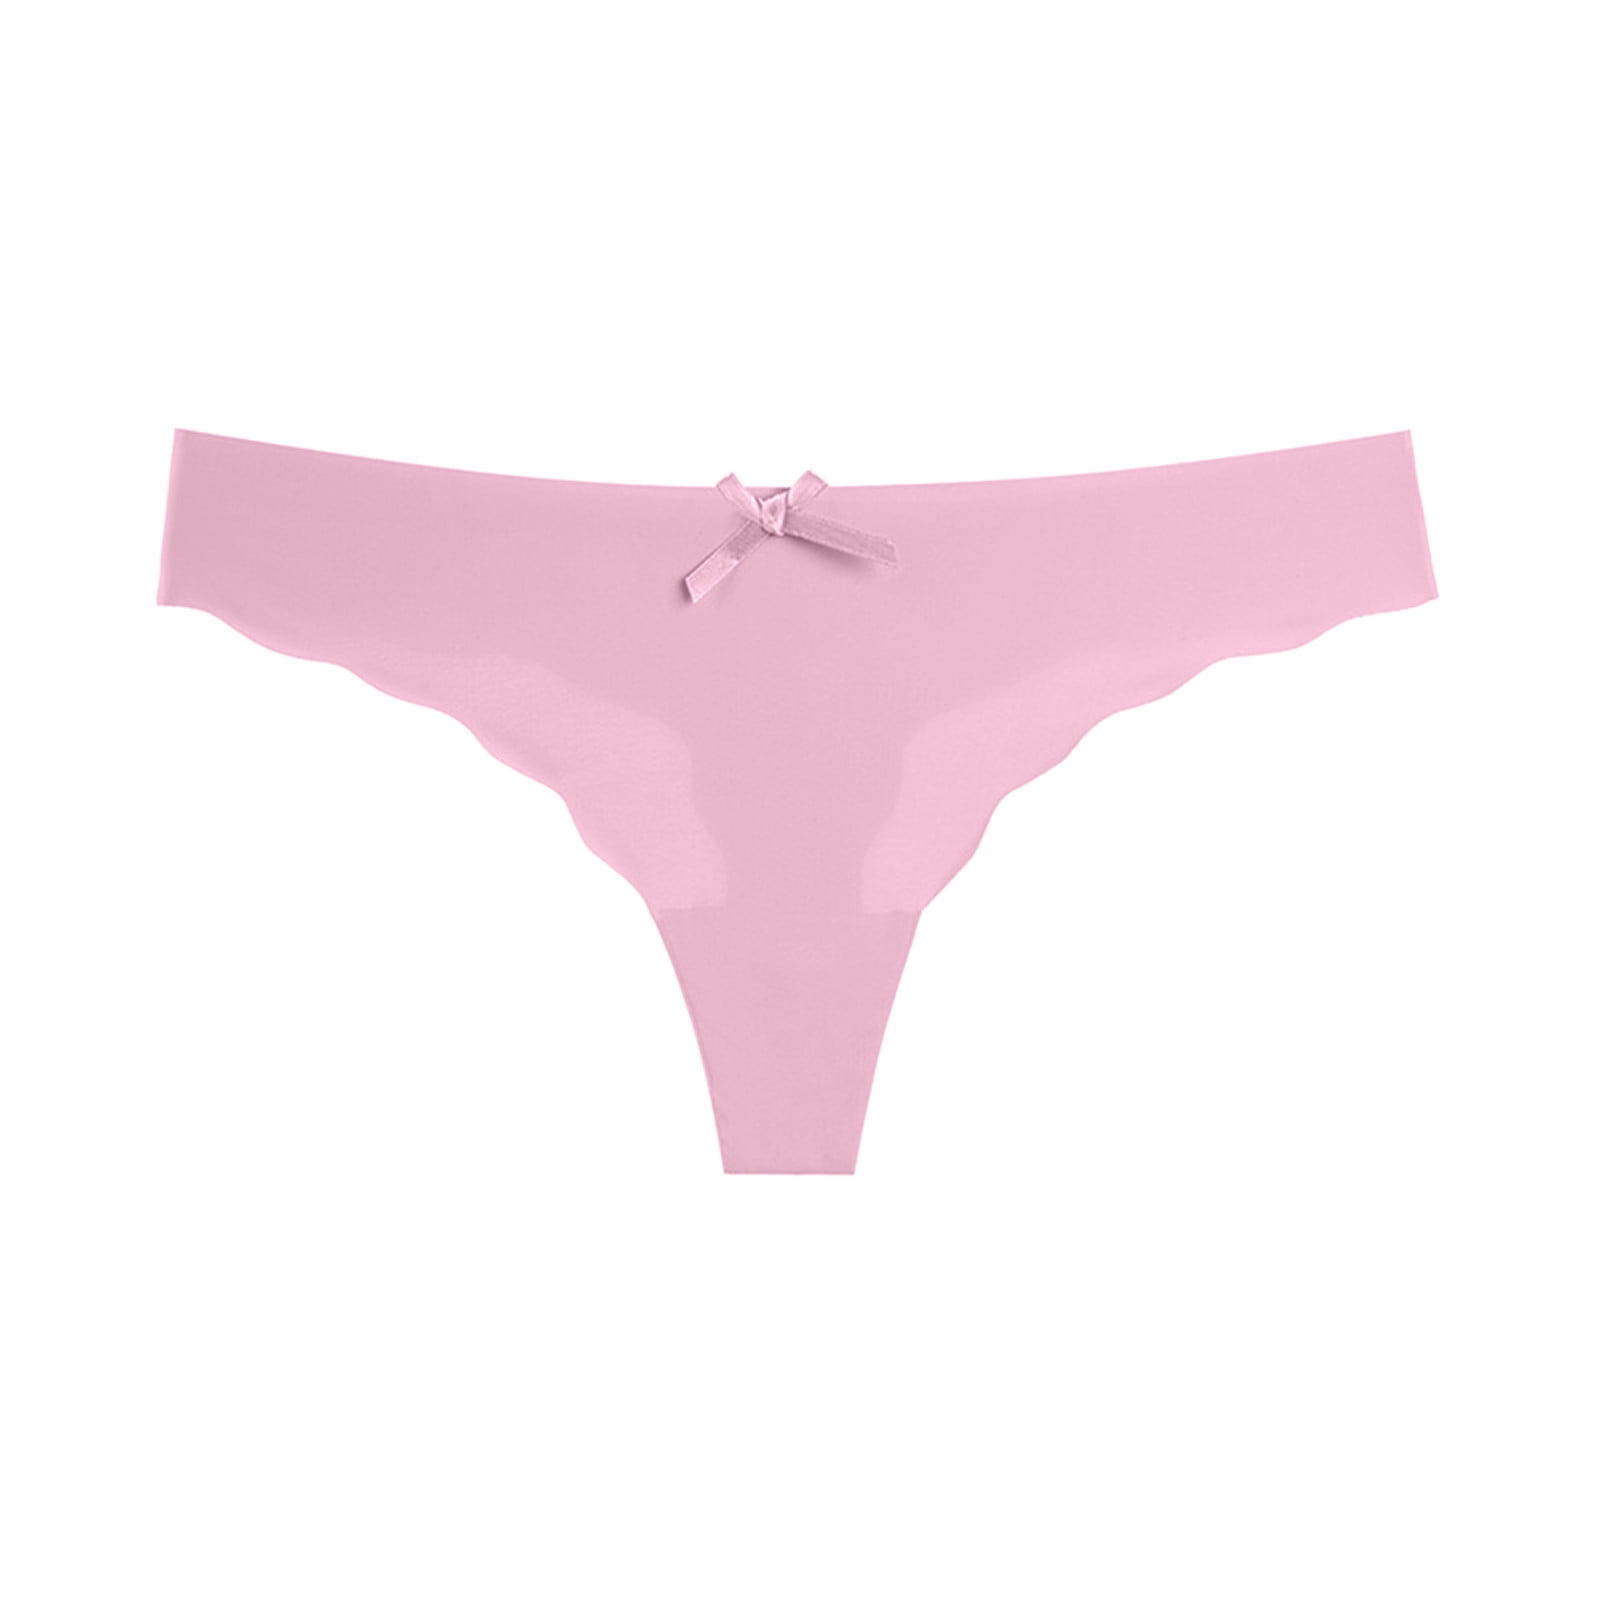 Buy AMYDA Women's Pink Seamless Wire-Free Stretchable Comfortable